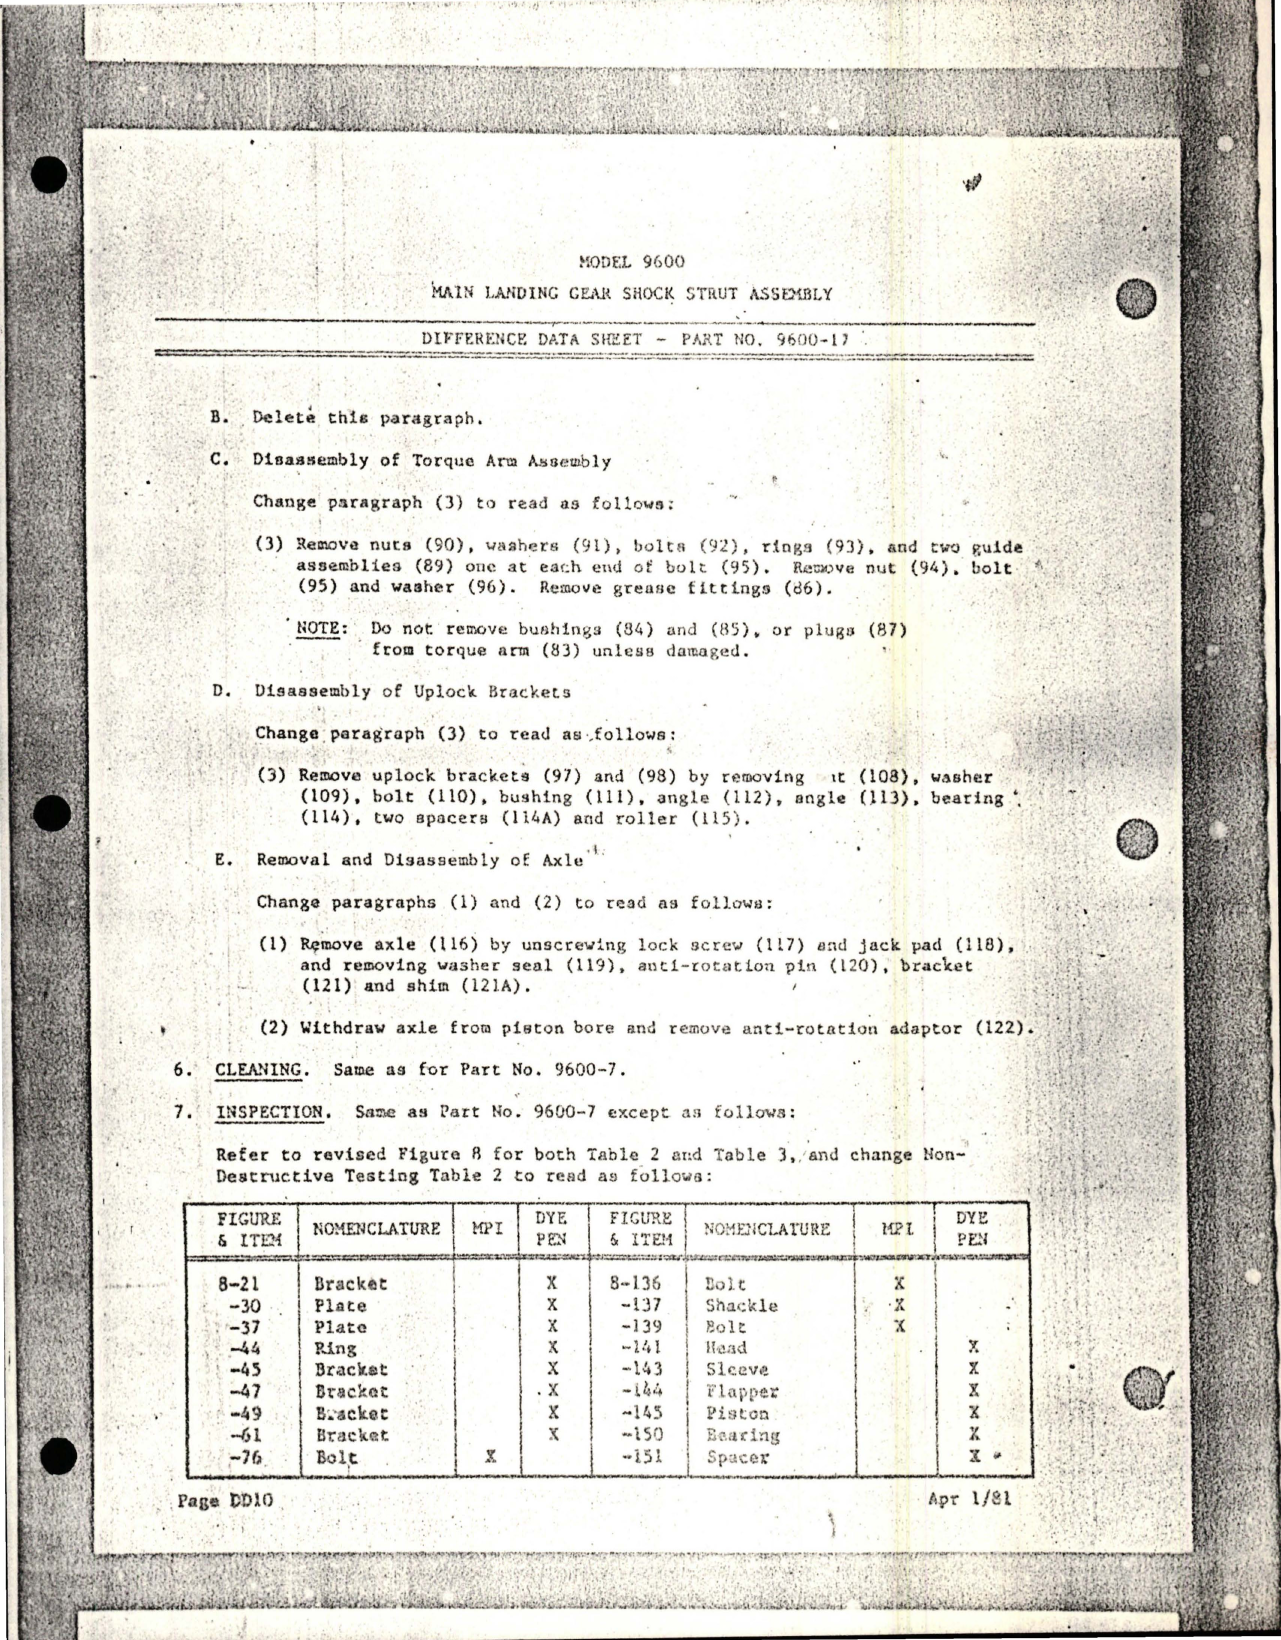 Sample page 7 from AirCorps Library document: Difference Data Sheet for Main Landing Gear Shock Strut Assembly - Part 9600-15